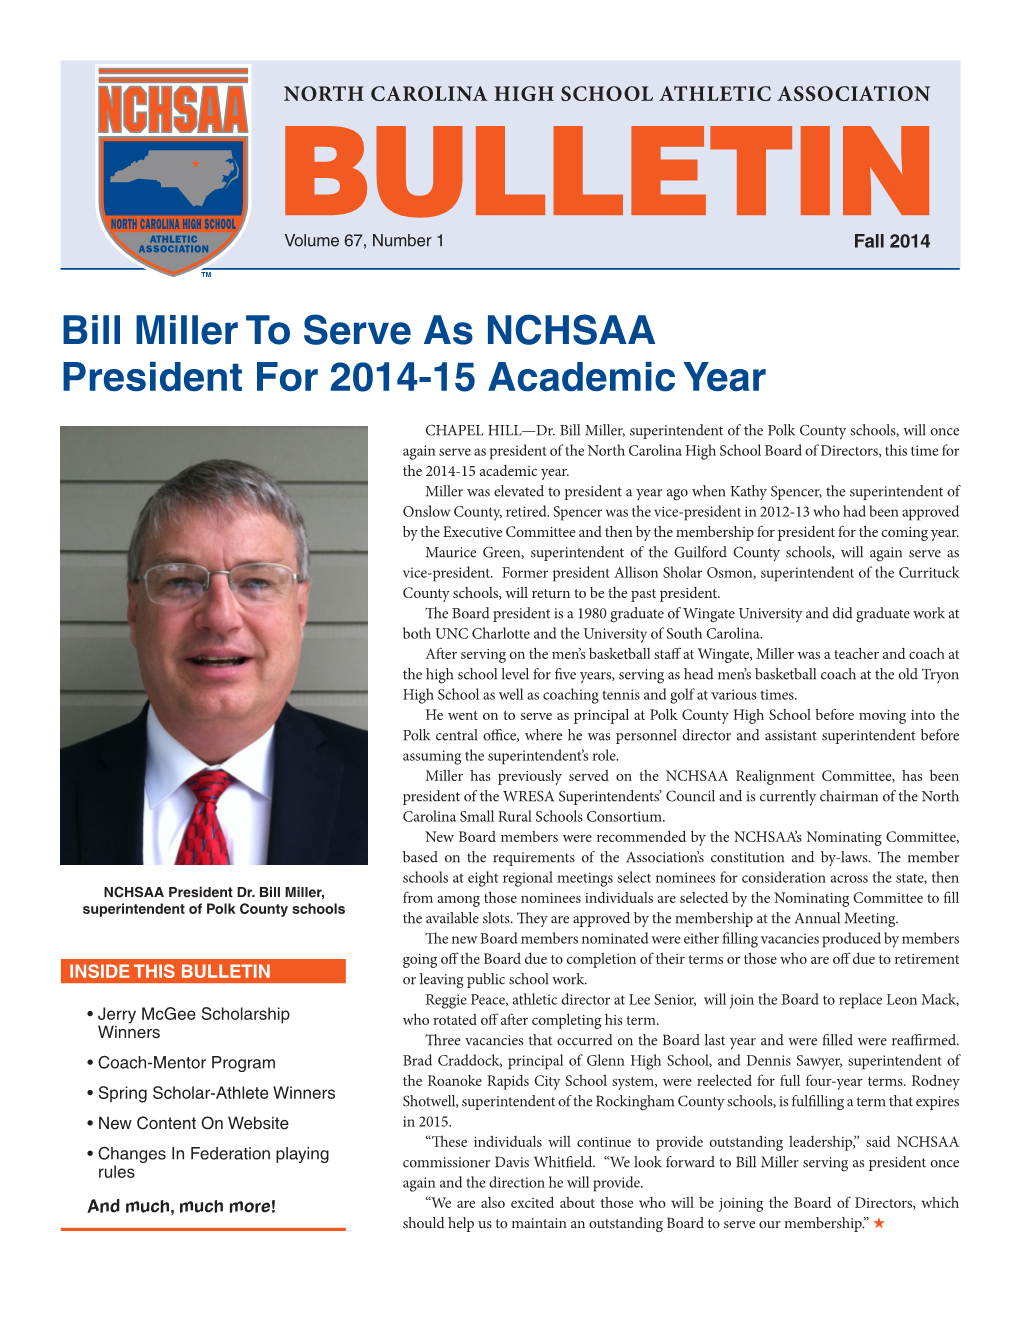 Bill Miller to Serve As NCHSAA President for 2014-15 Academic Year